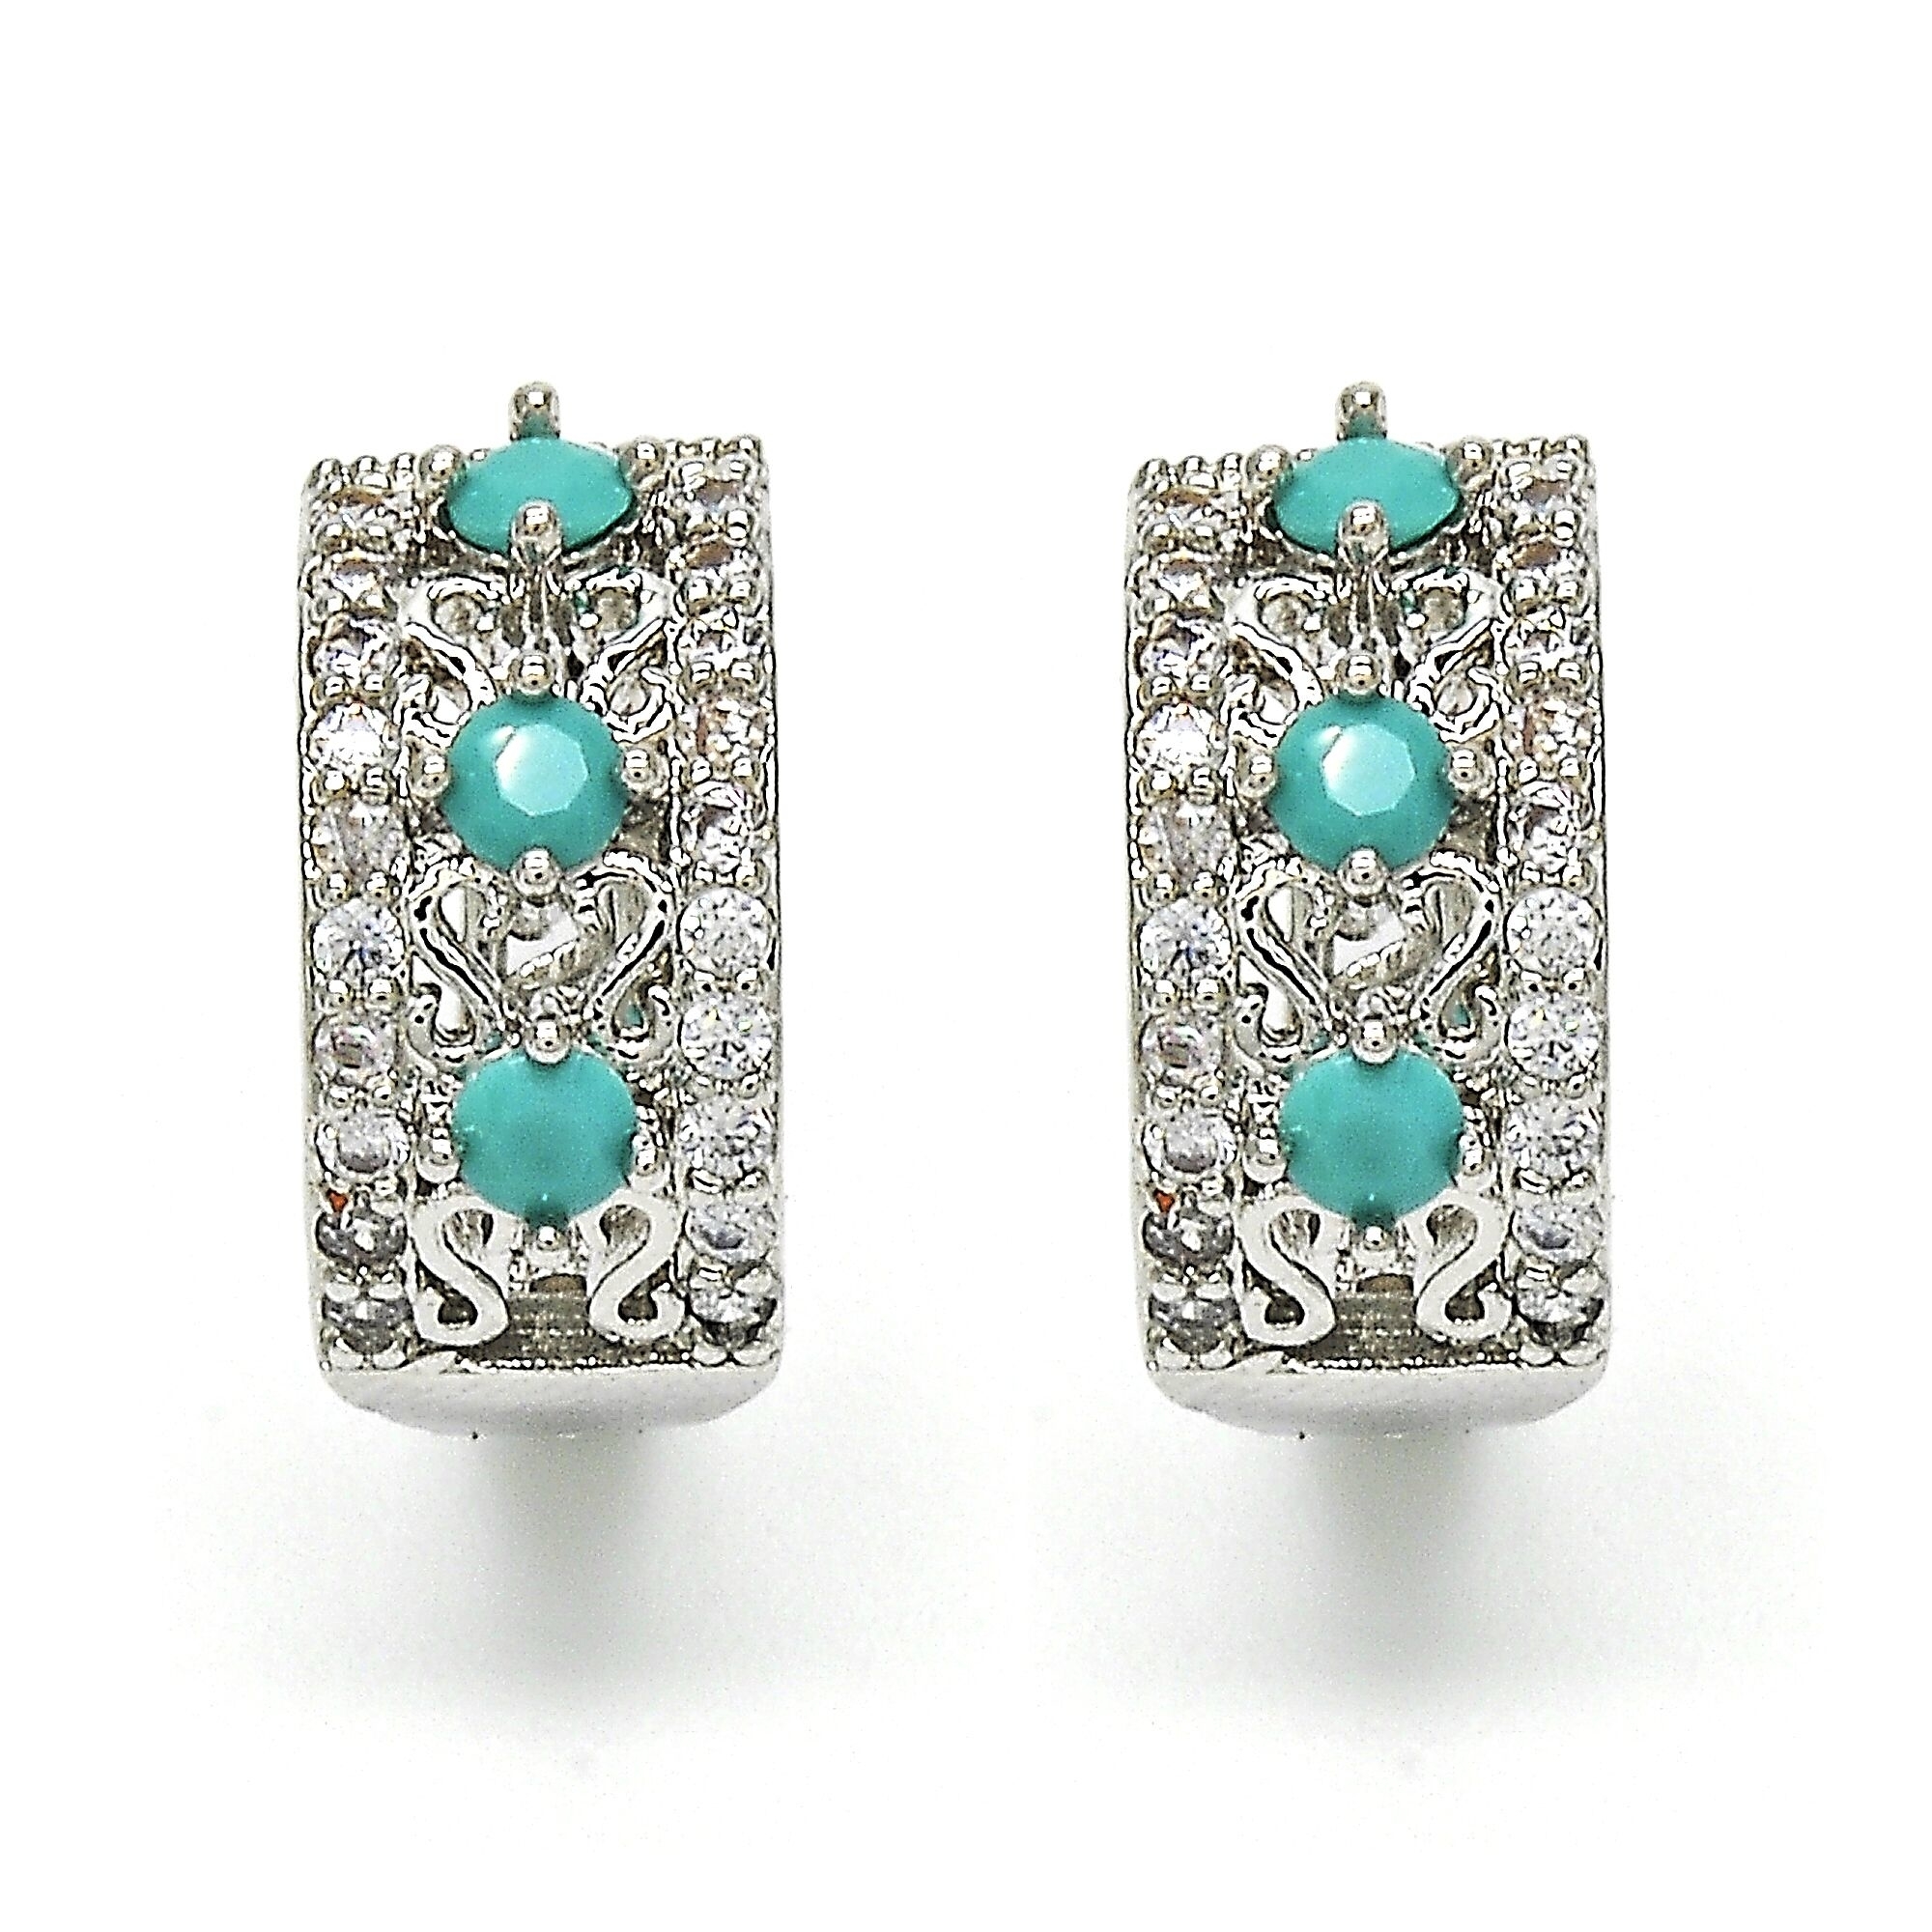 RHODIUM Filled High Polish Finsh LAB CREATED Turquoise EARRINGS